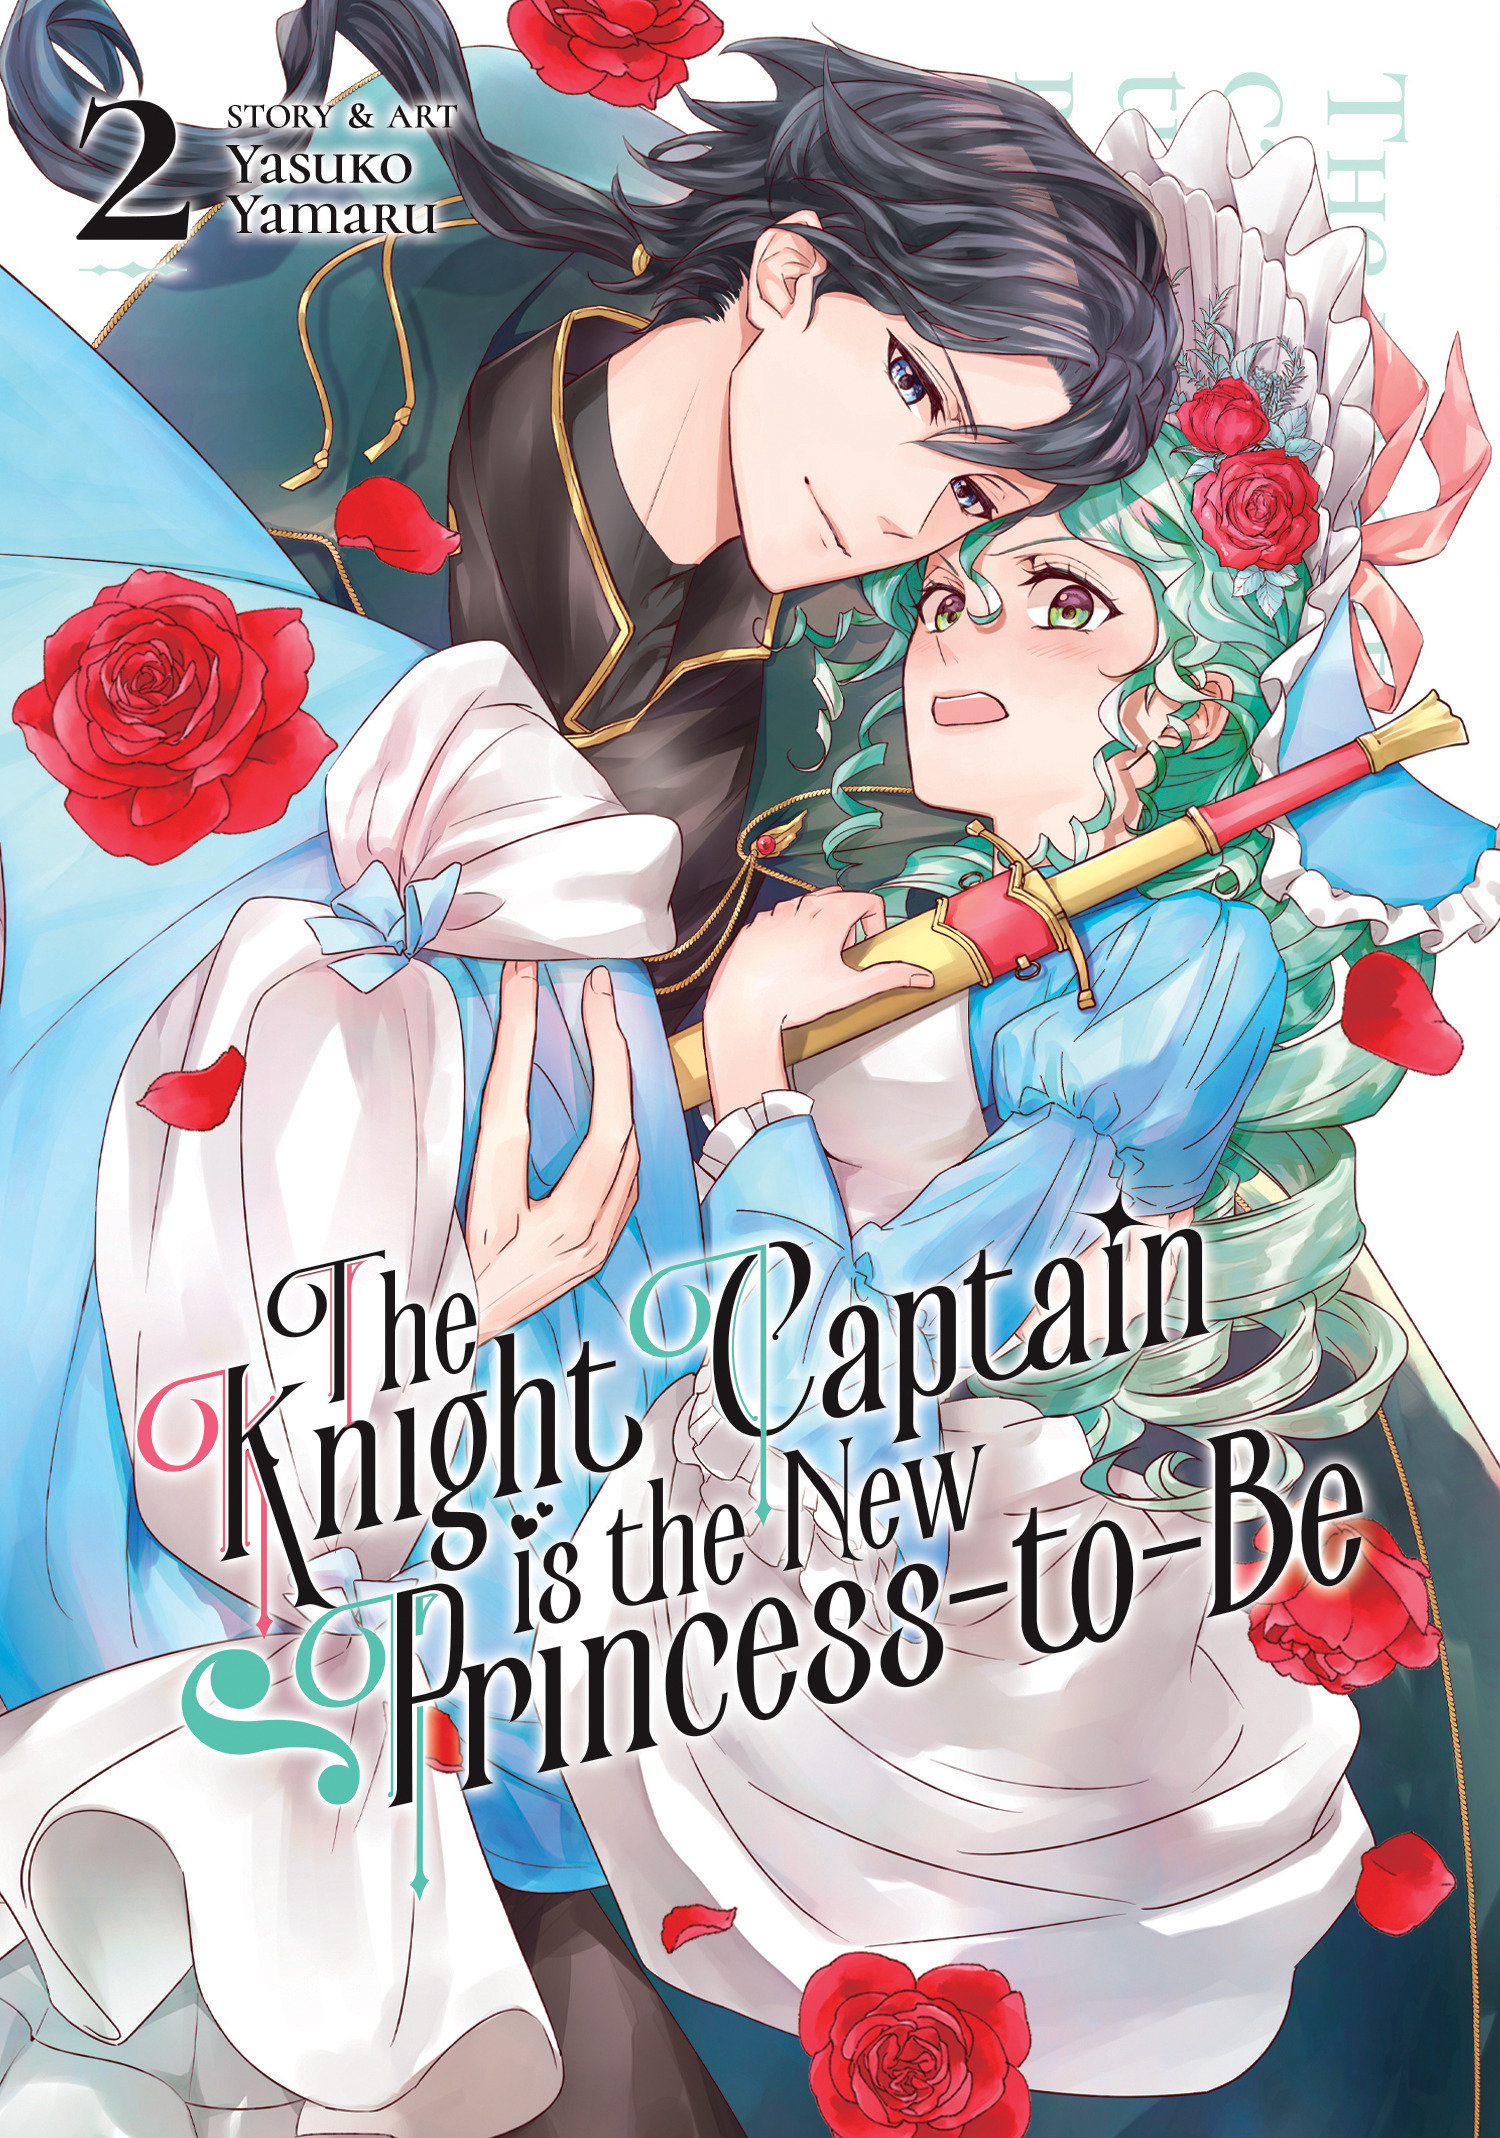 Knight Captain is the New Princess-To-Be Manga Volume 2